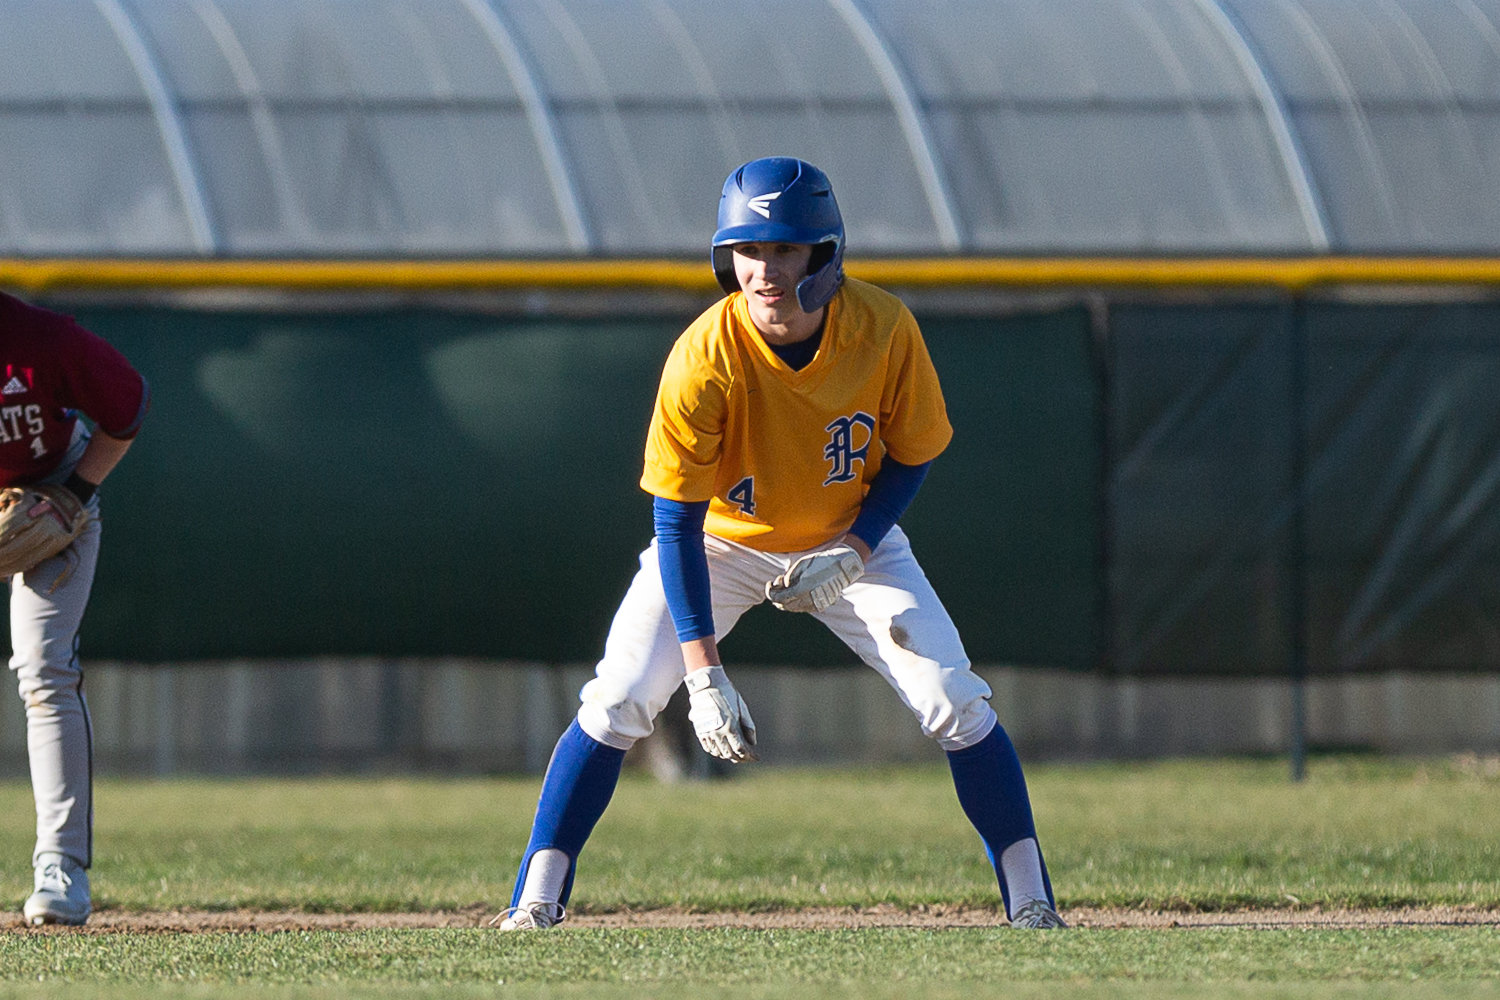 Rochester leadoff hitter Mason Ubias navigates the bases against W.F. West at Heinz-Rotter Field March 21.